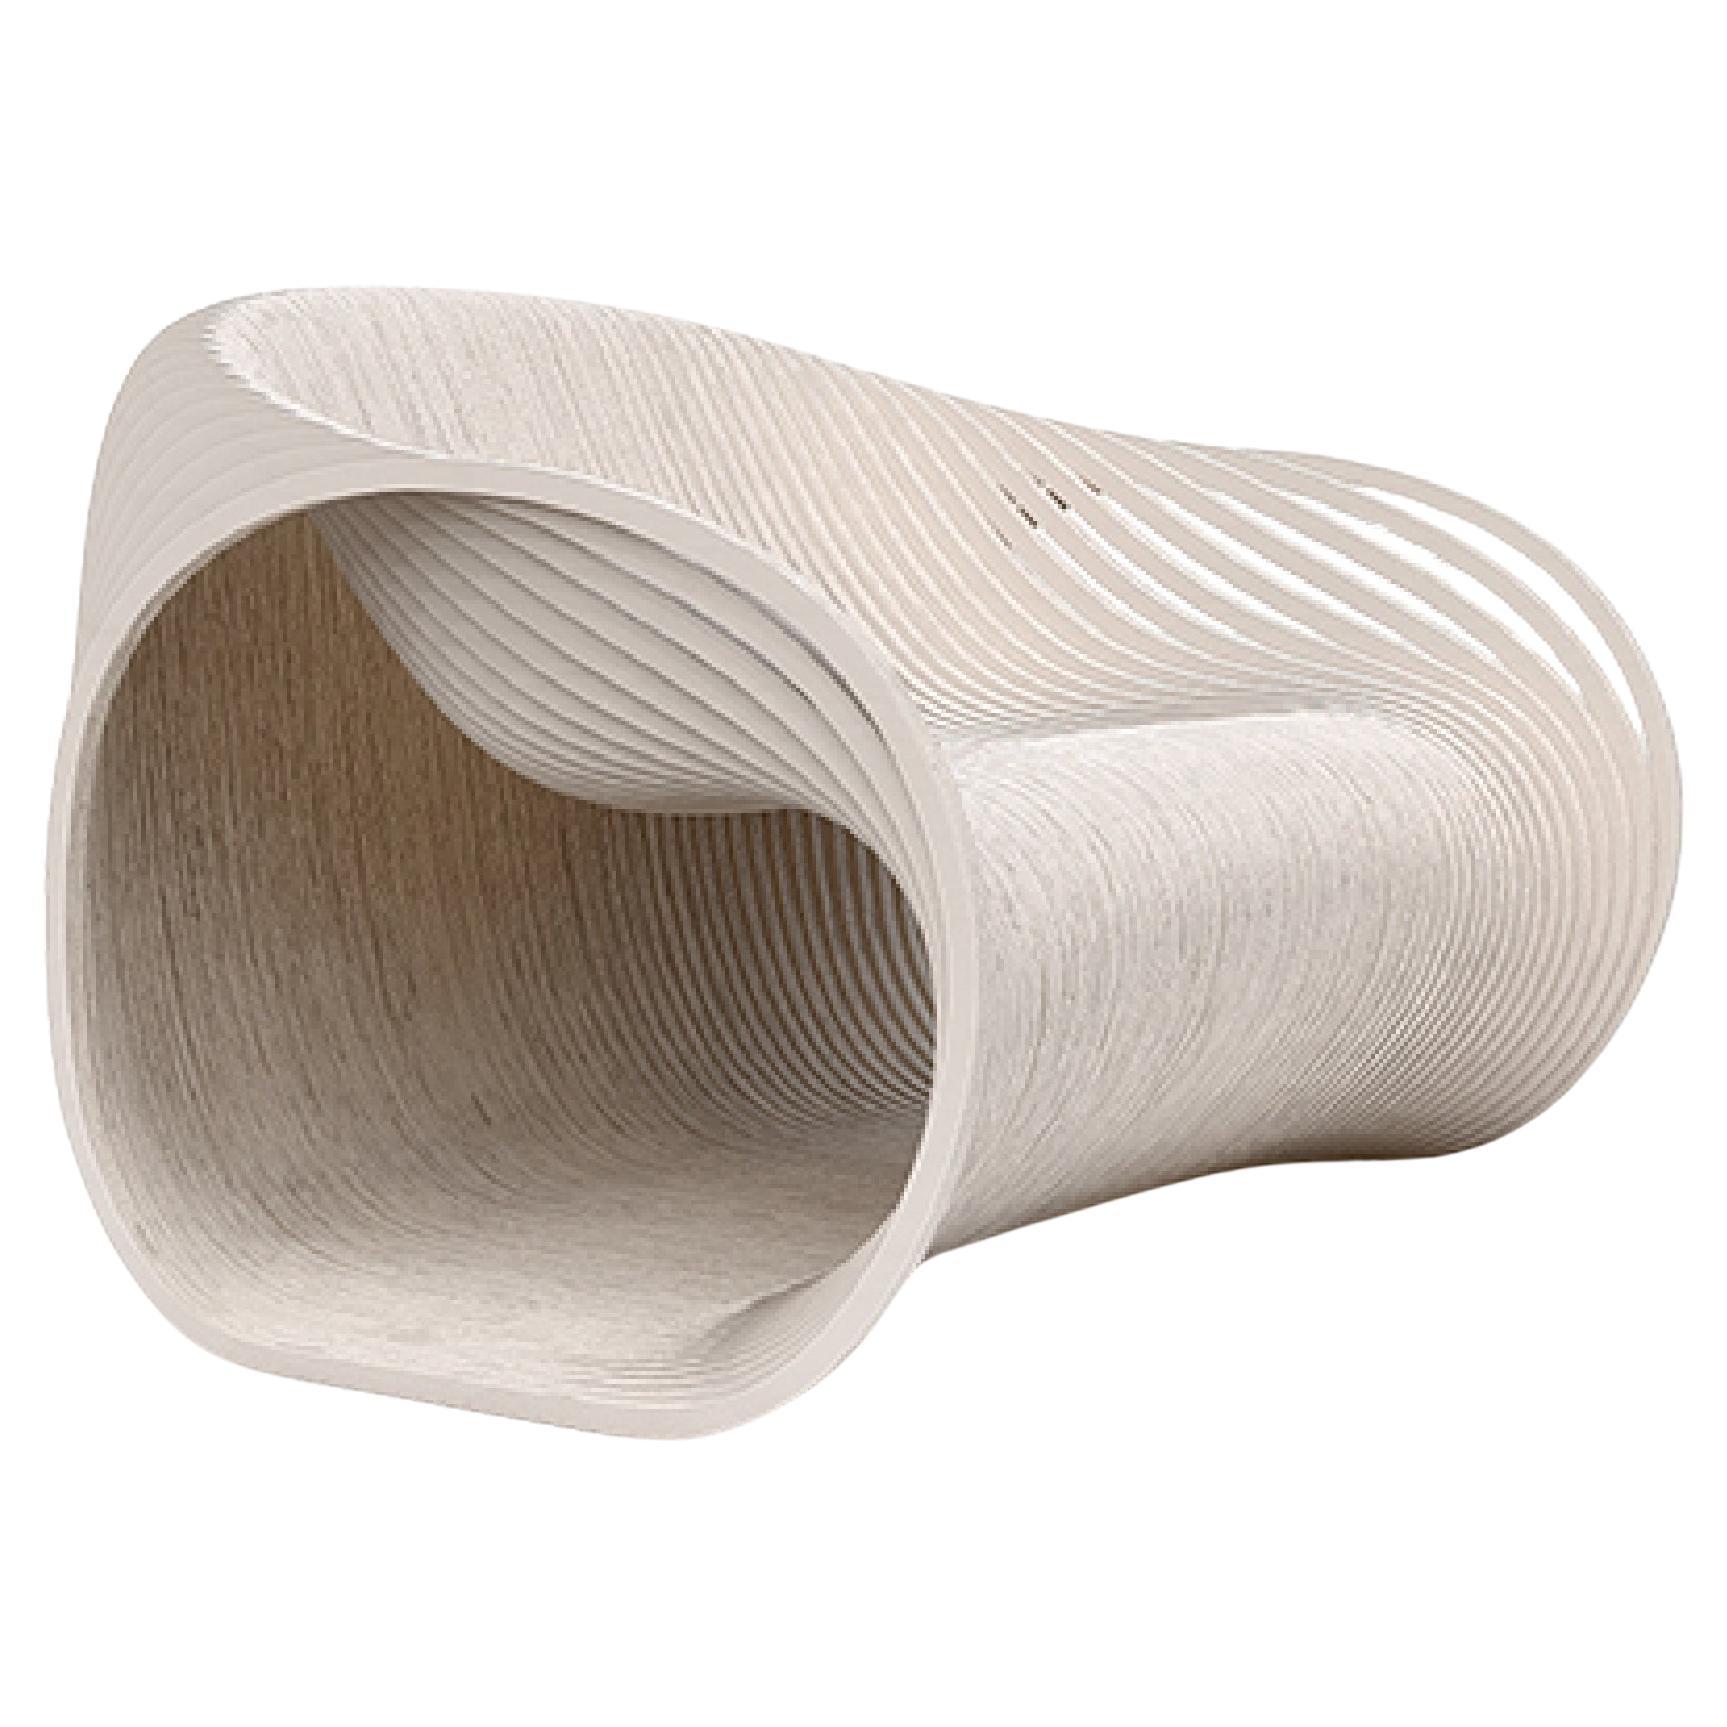 Soave Lounge by Piegatto, a Sculptural Chair